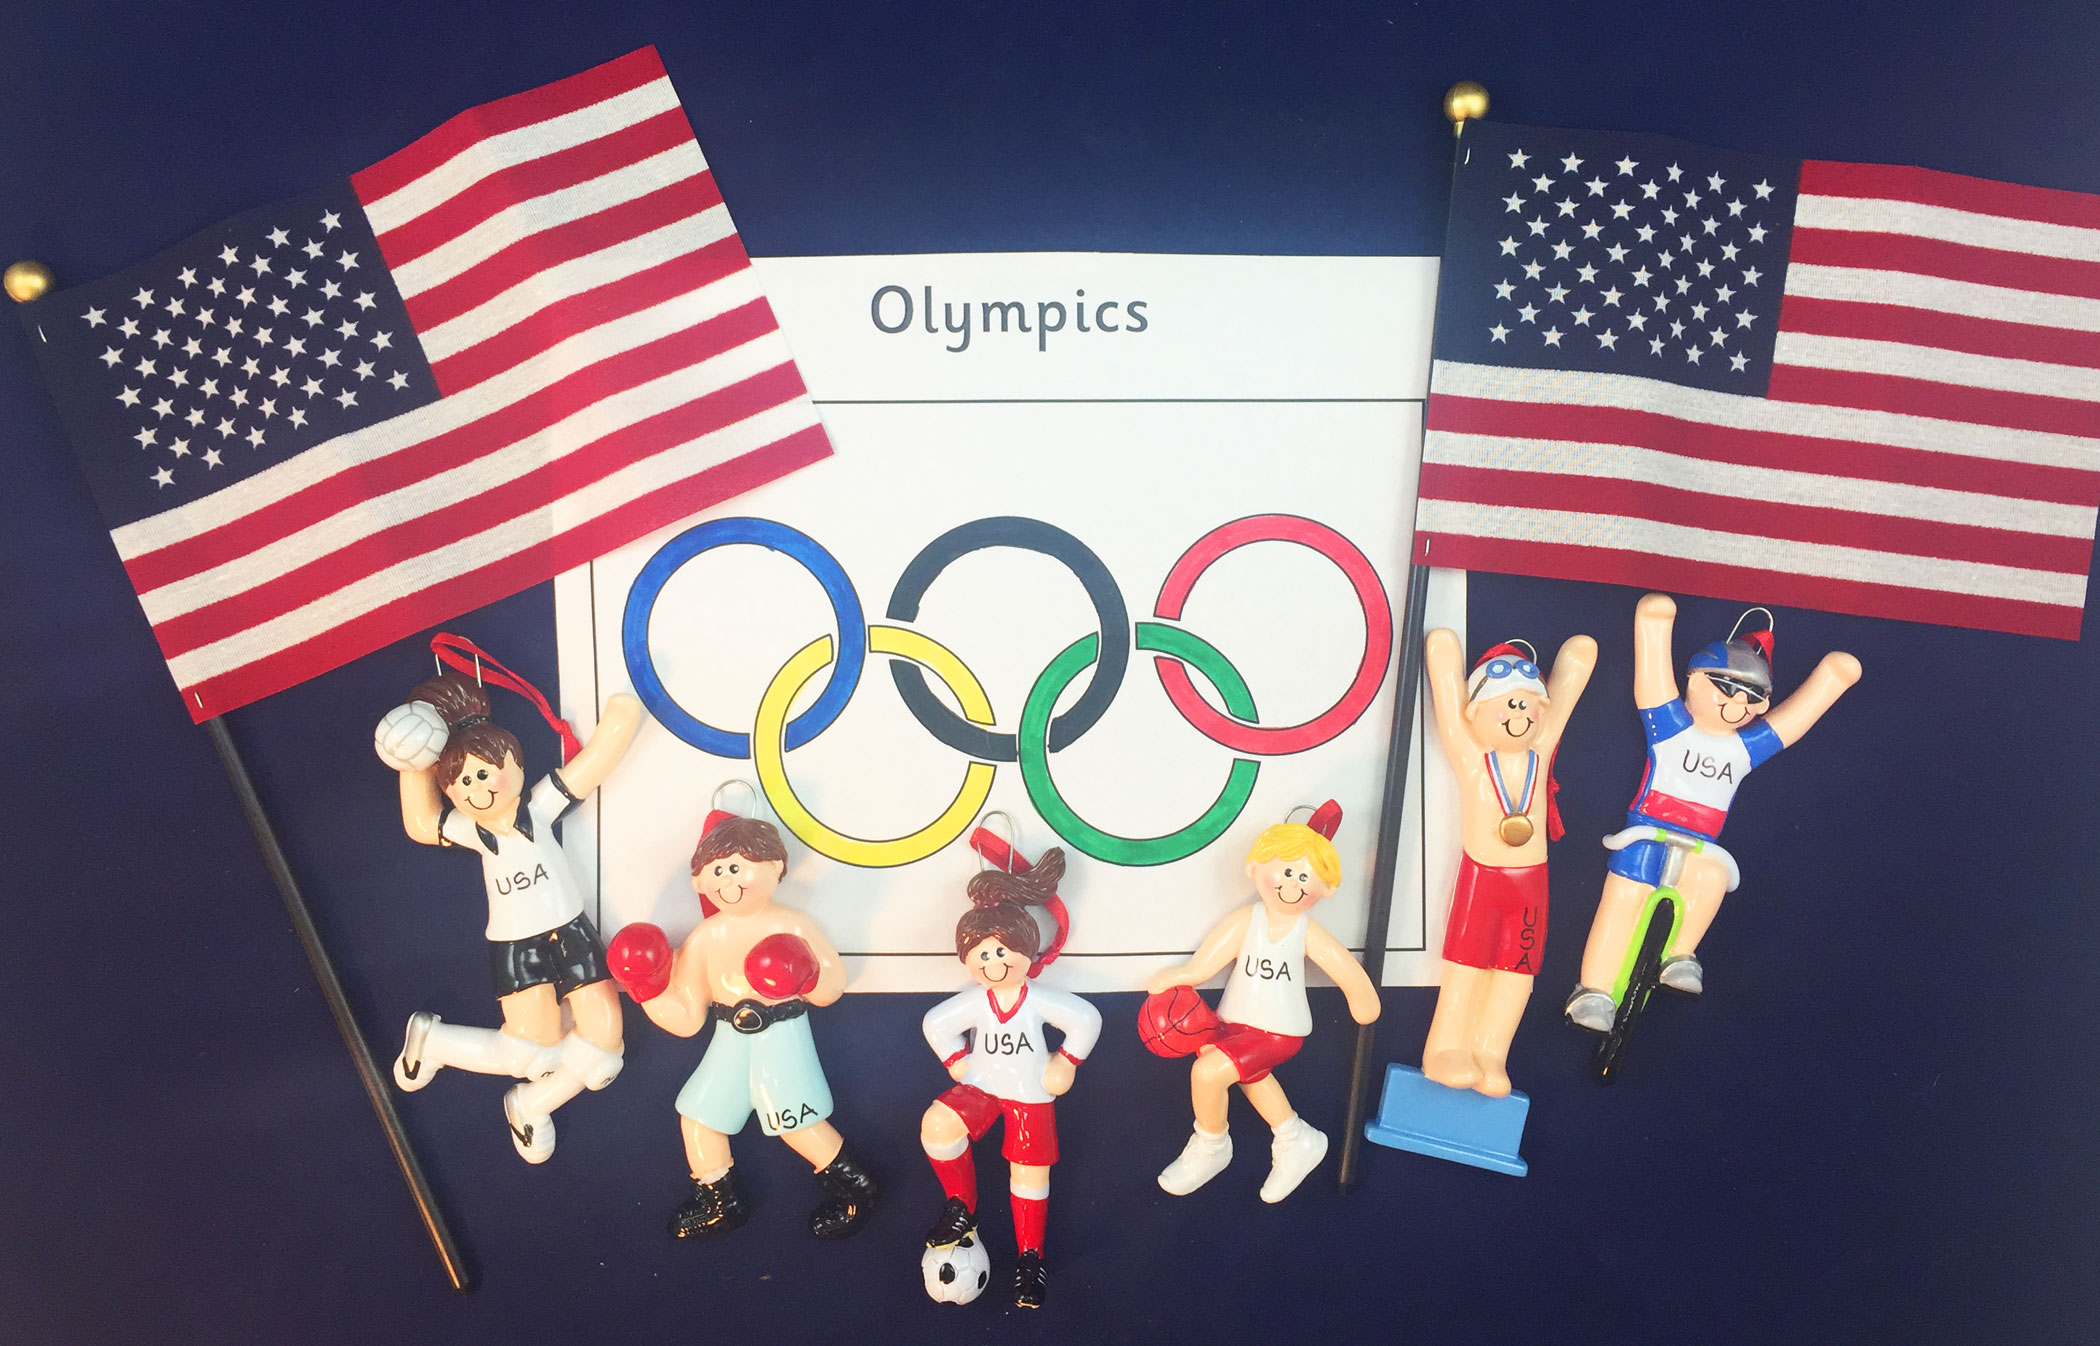 Personalized Ornaments For The 2016 Summer Olympics | OrnamentShop.com